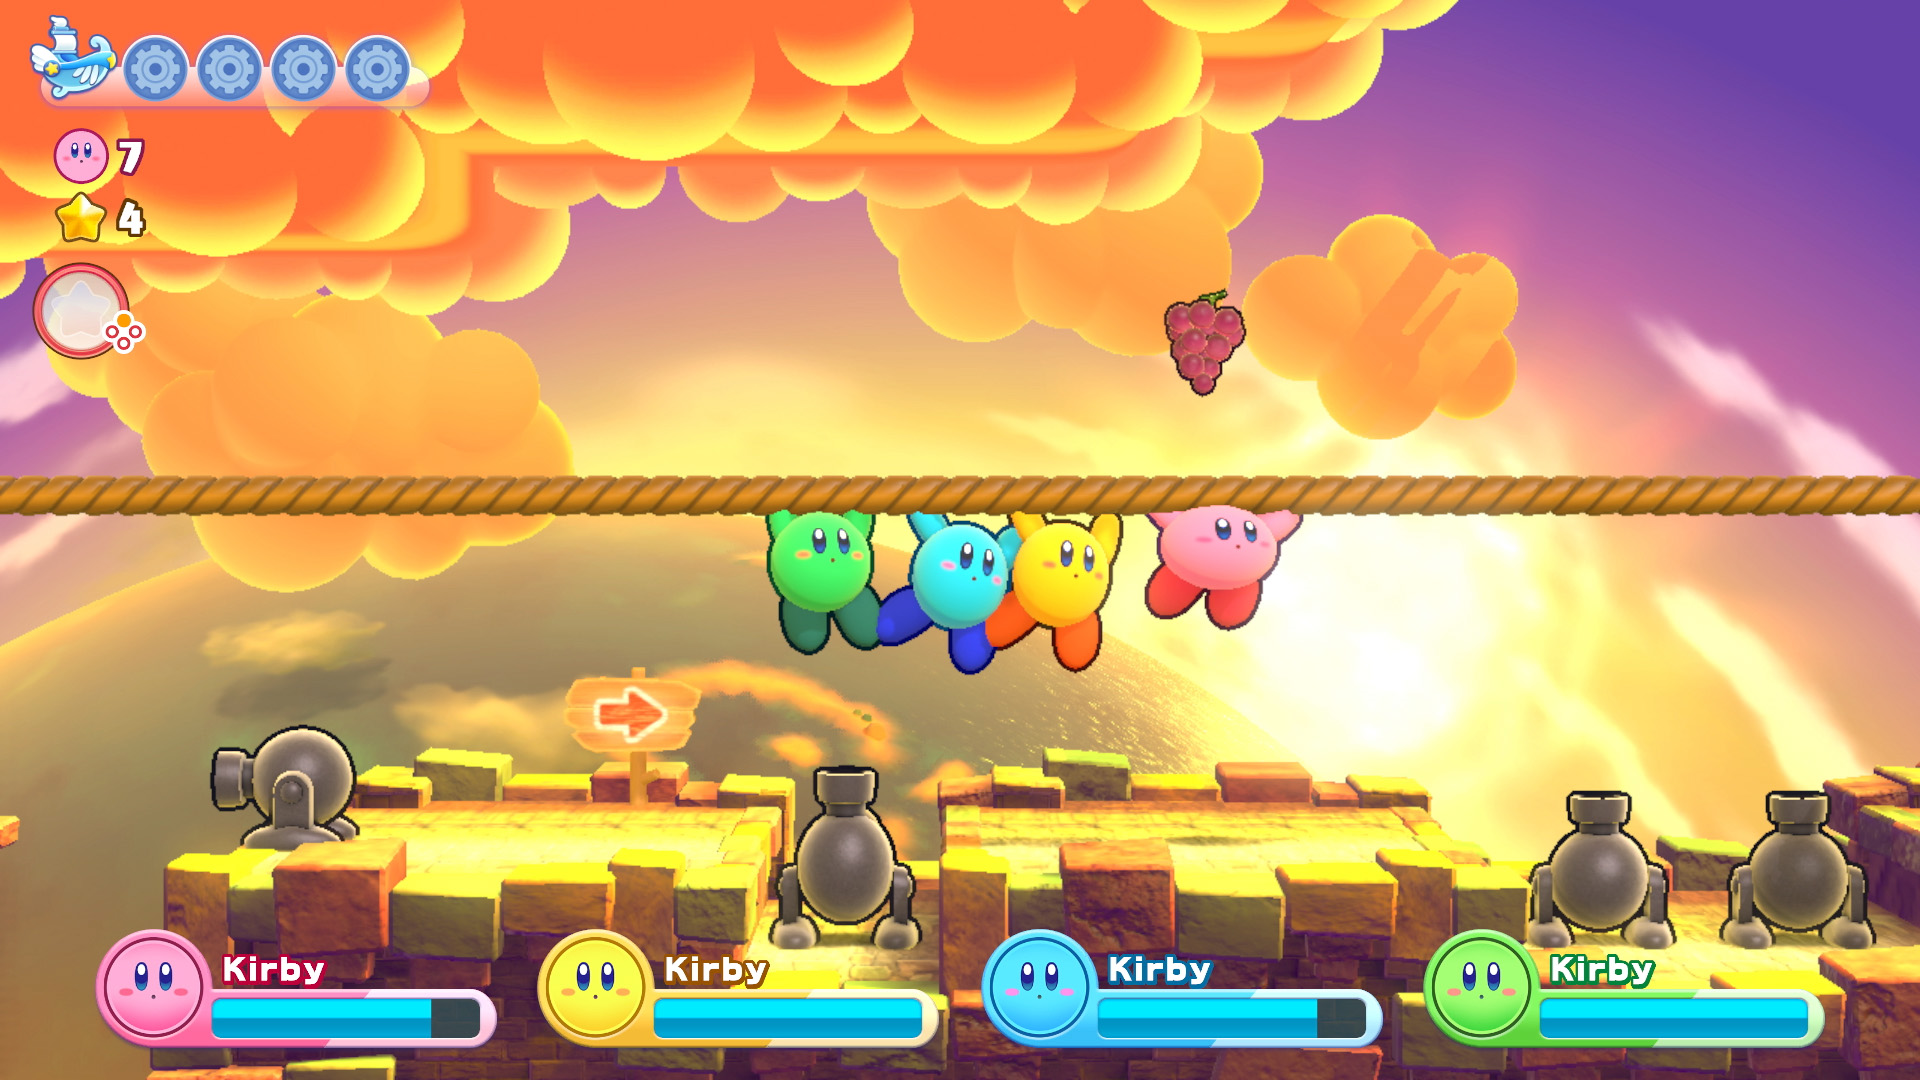 Kirby's Return to Dream Land Deluxe Nintendo Switch Account pixelpuffin.net Activation Link 37.28$